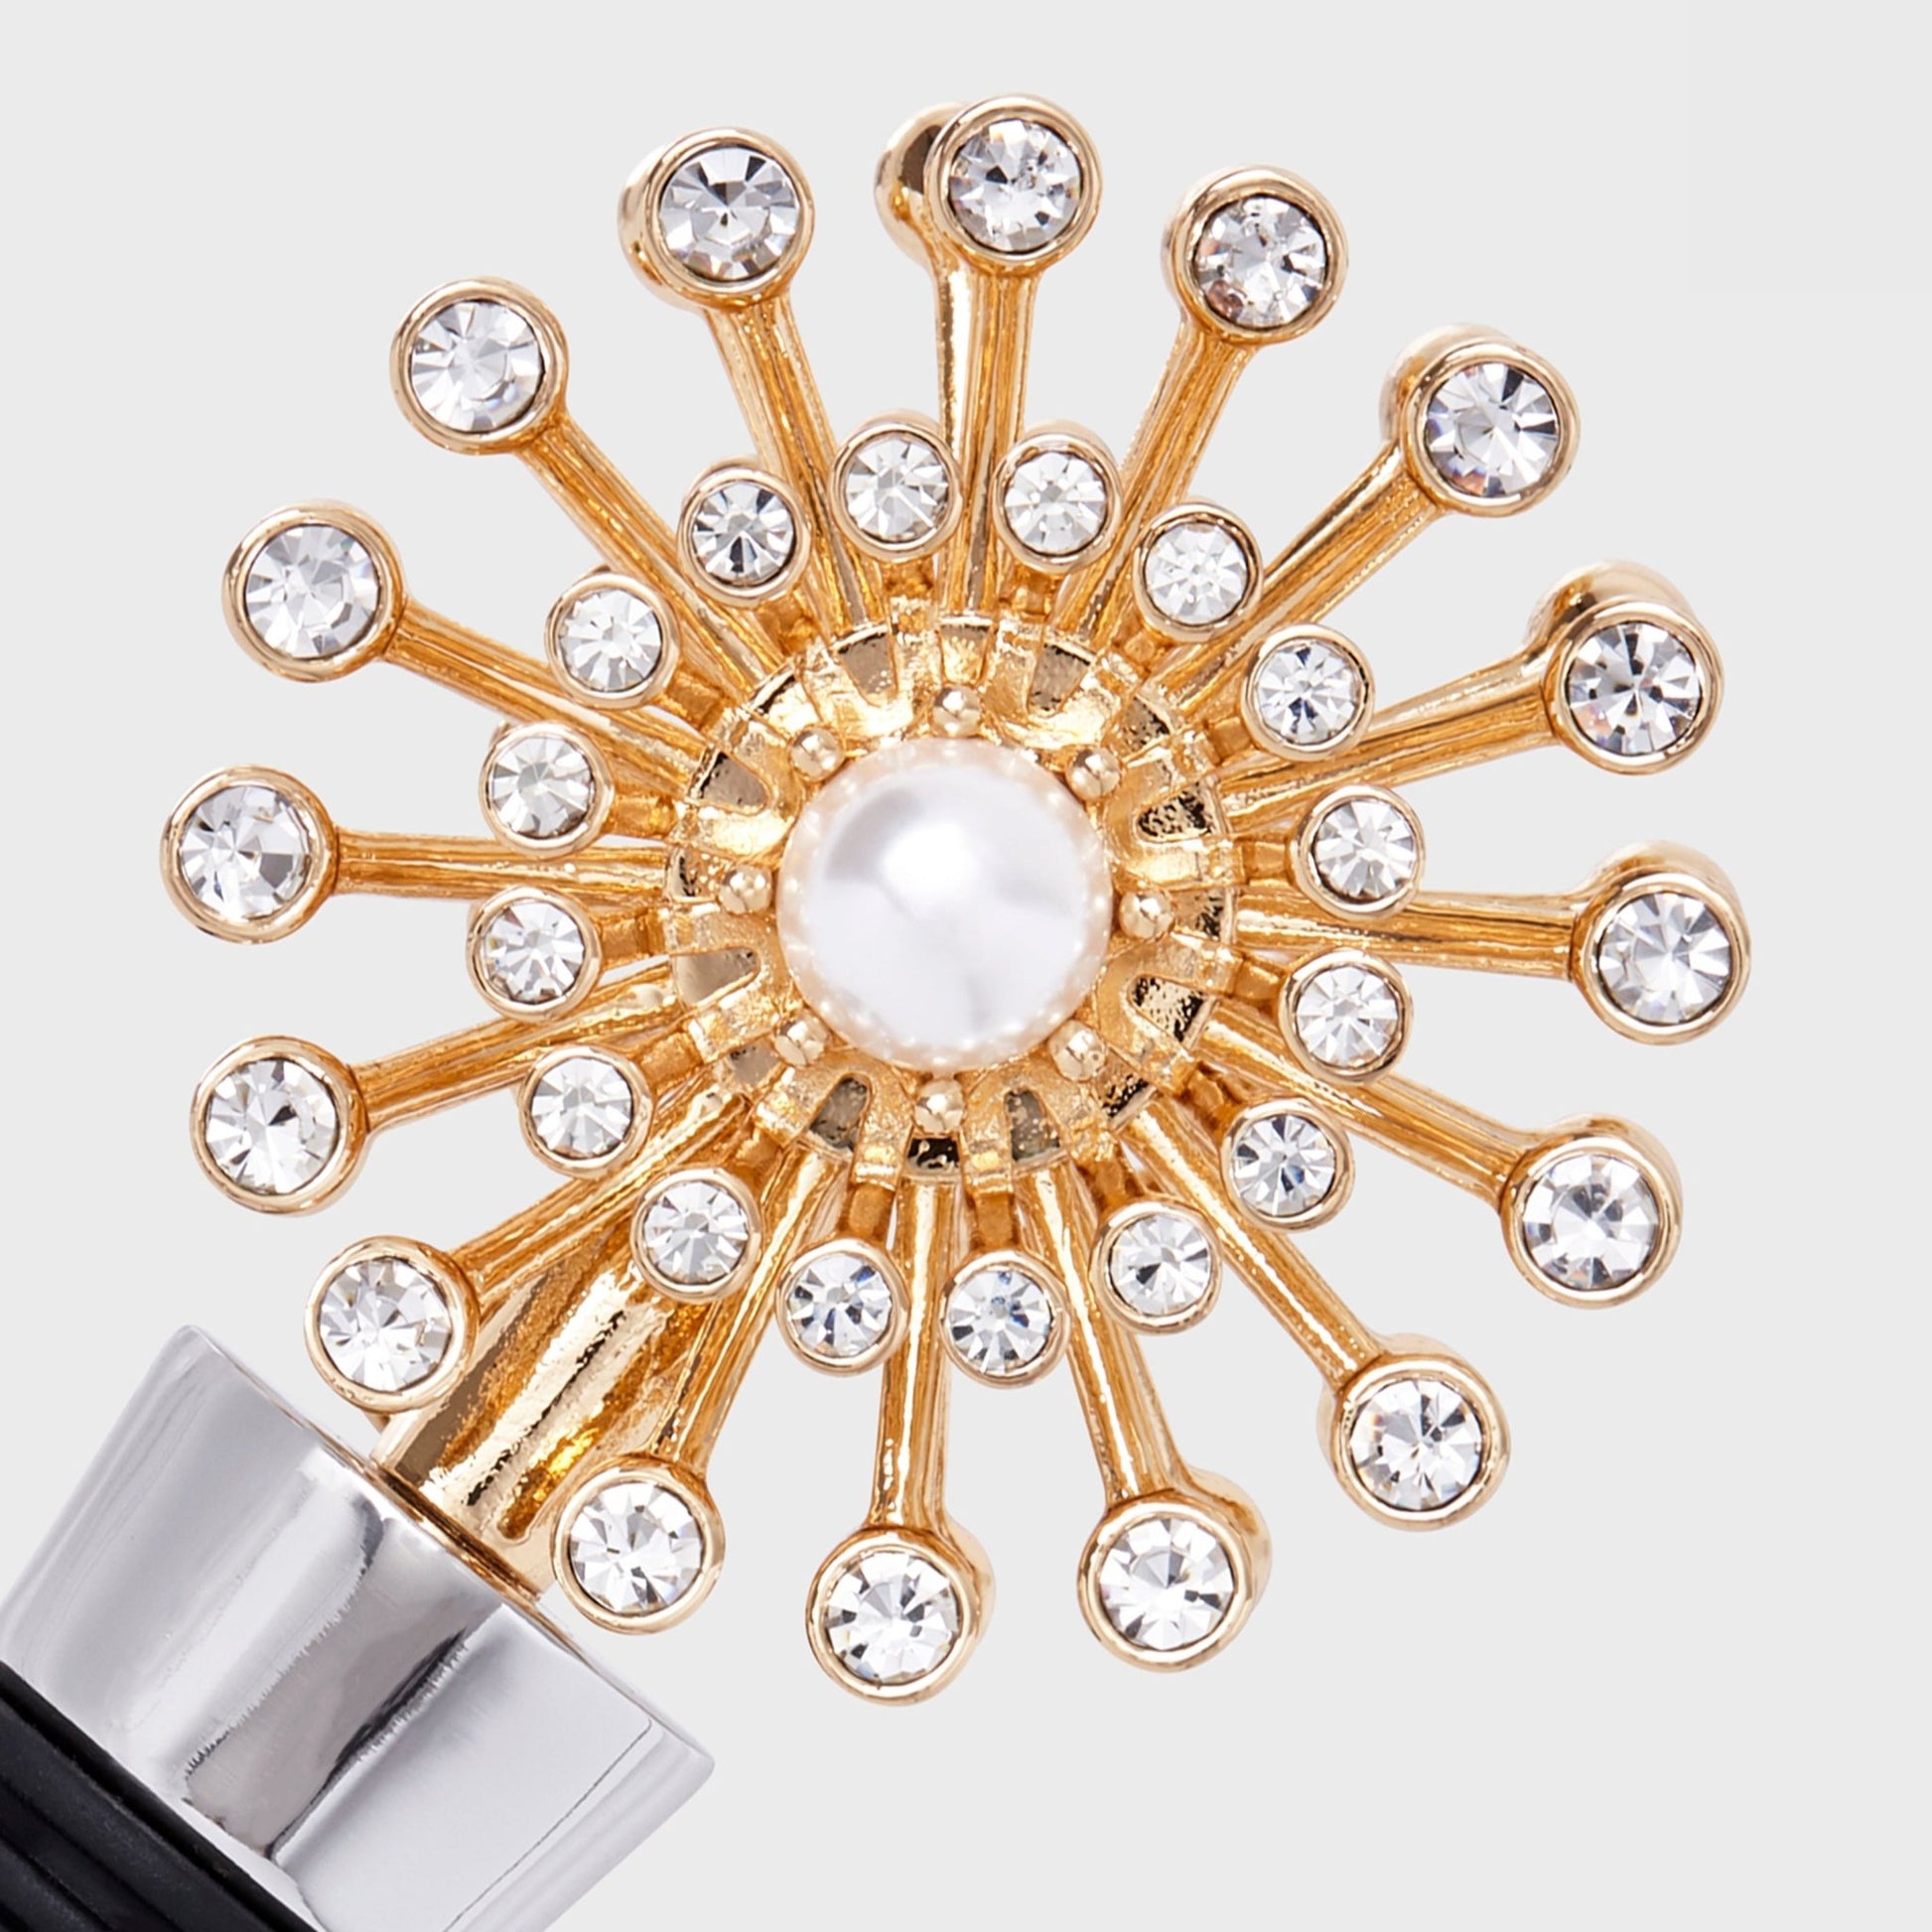 Pearl star wine stopper - HOUSE OF SHE